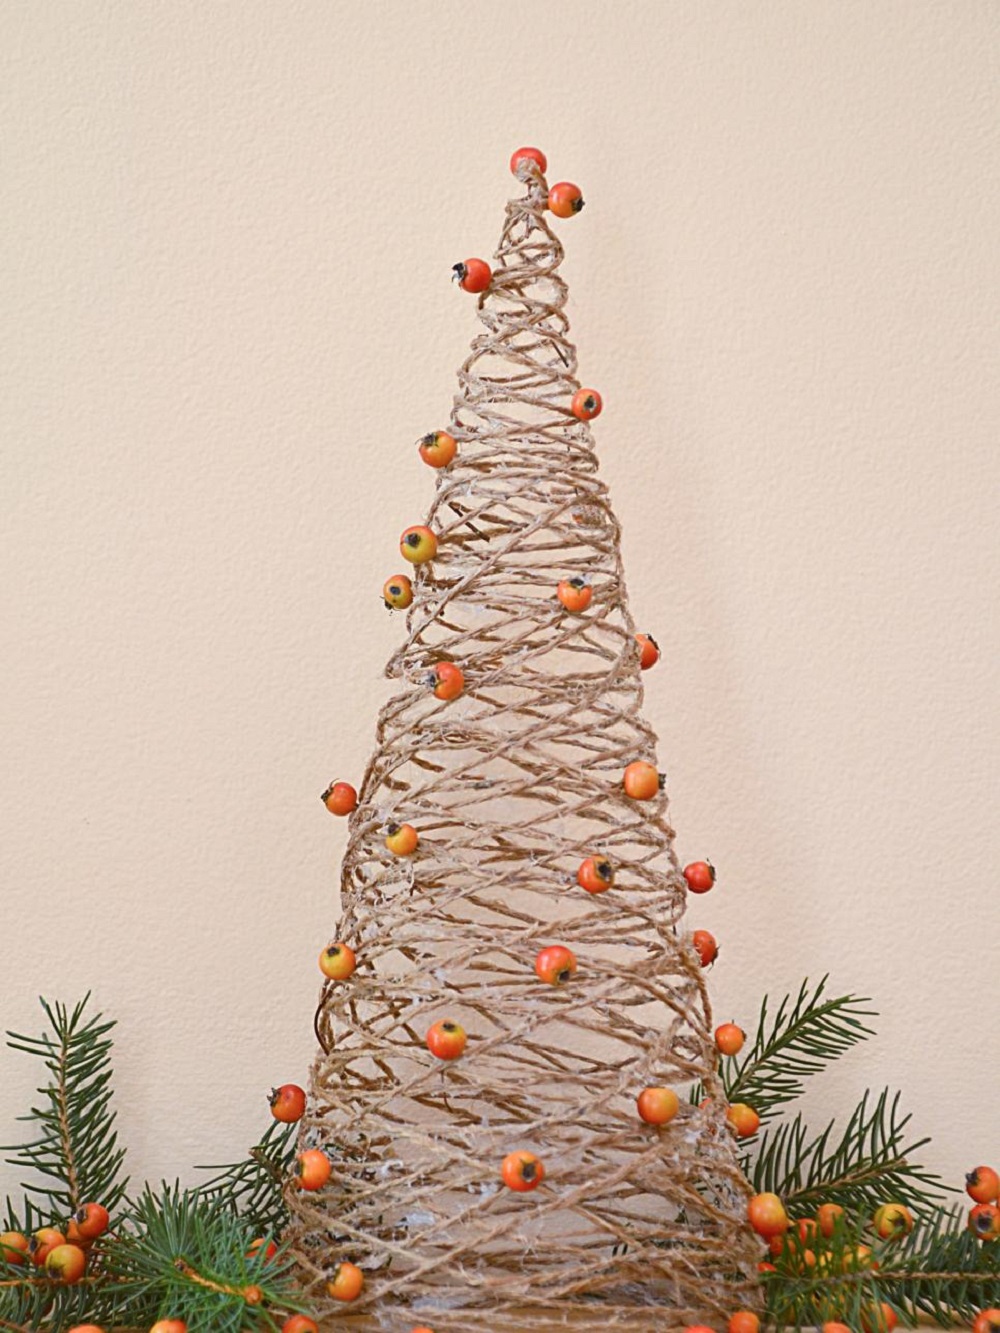 t3-1 Unconventional Christmas tree ideas you can use in your living room